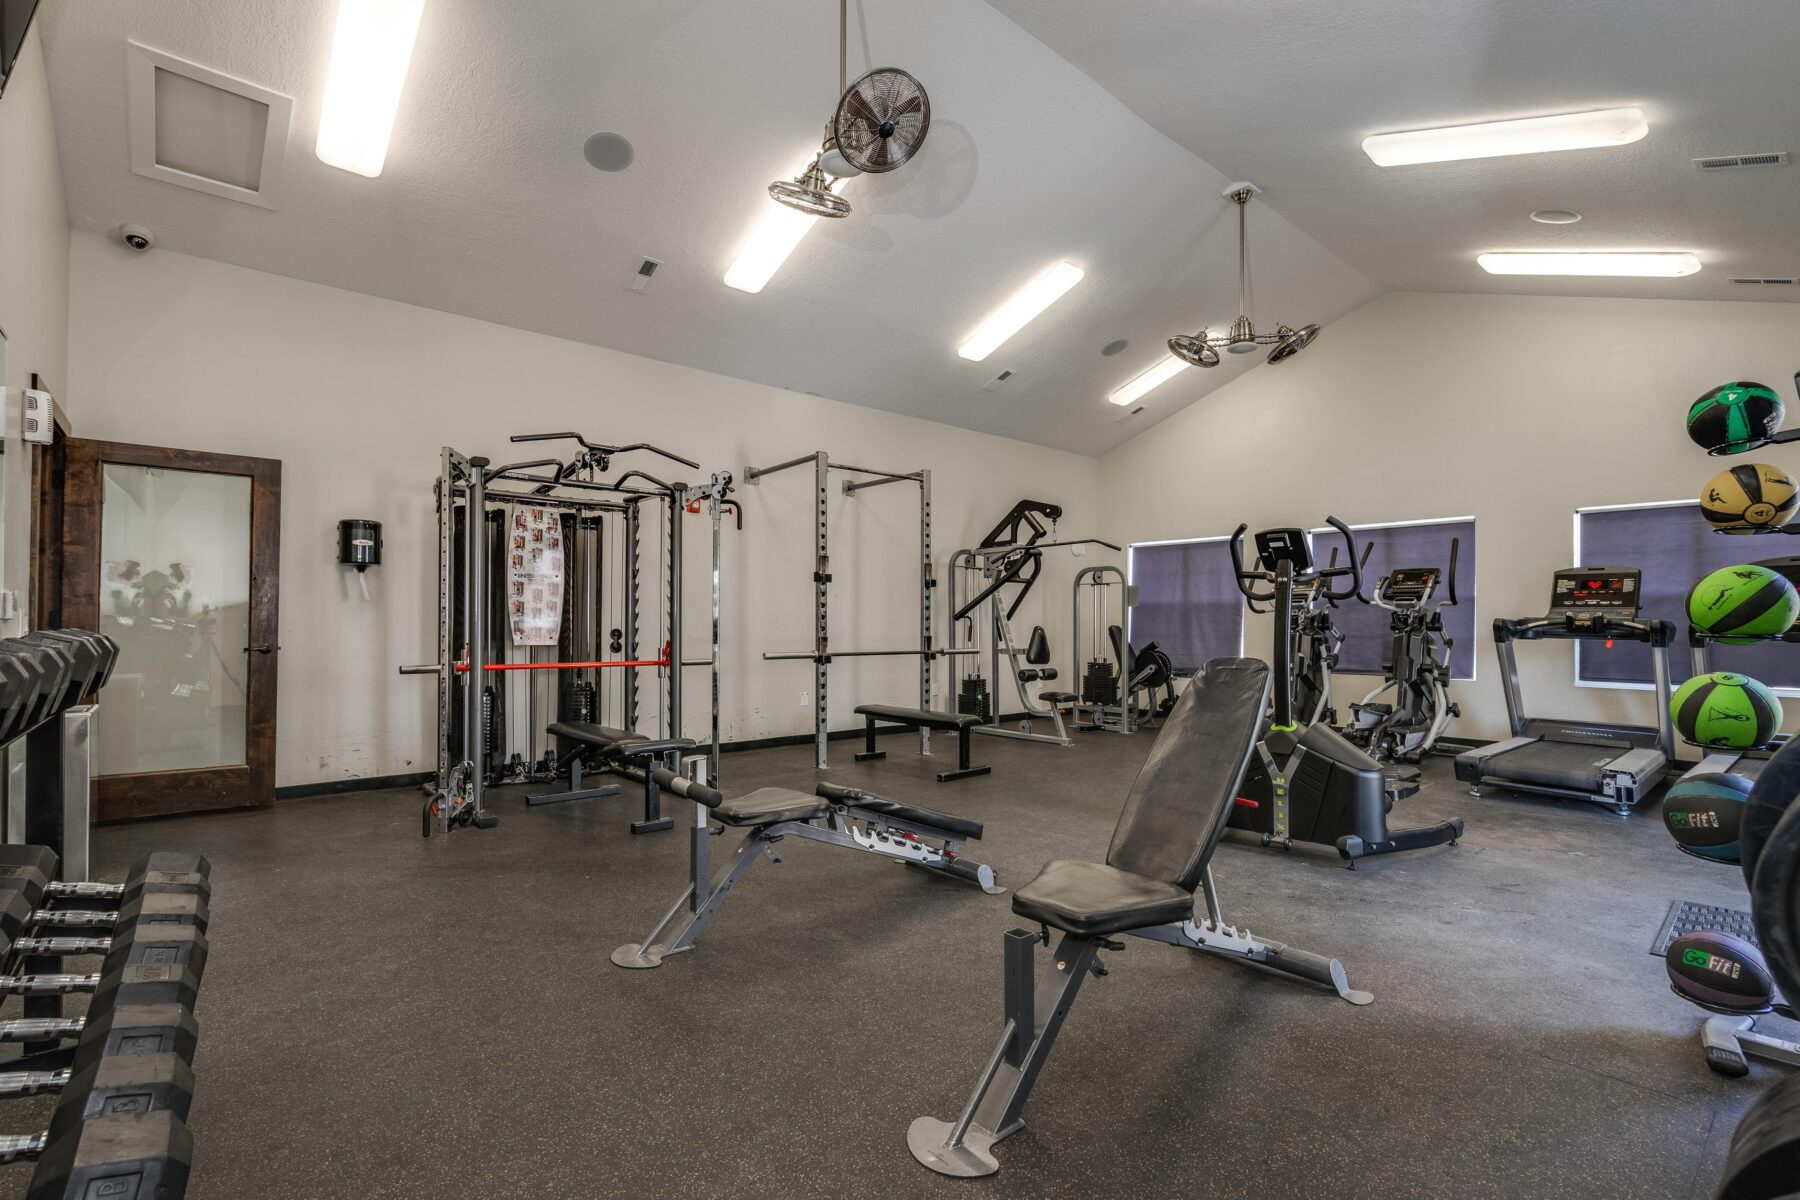 Communities fitness center with modern cardio equipment and weights.